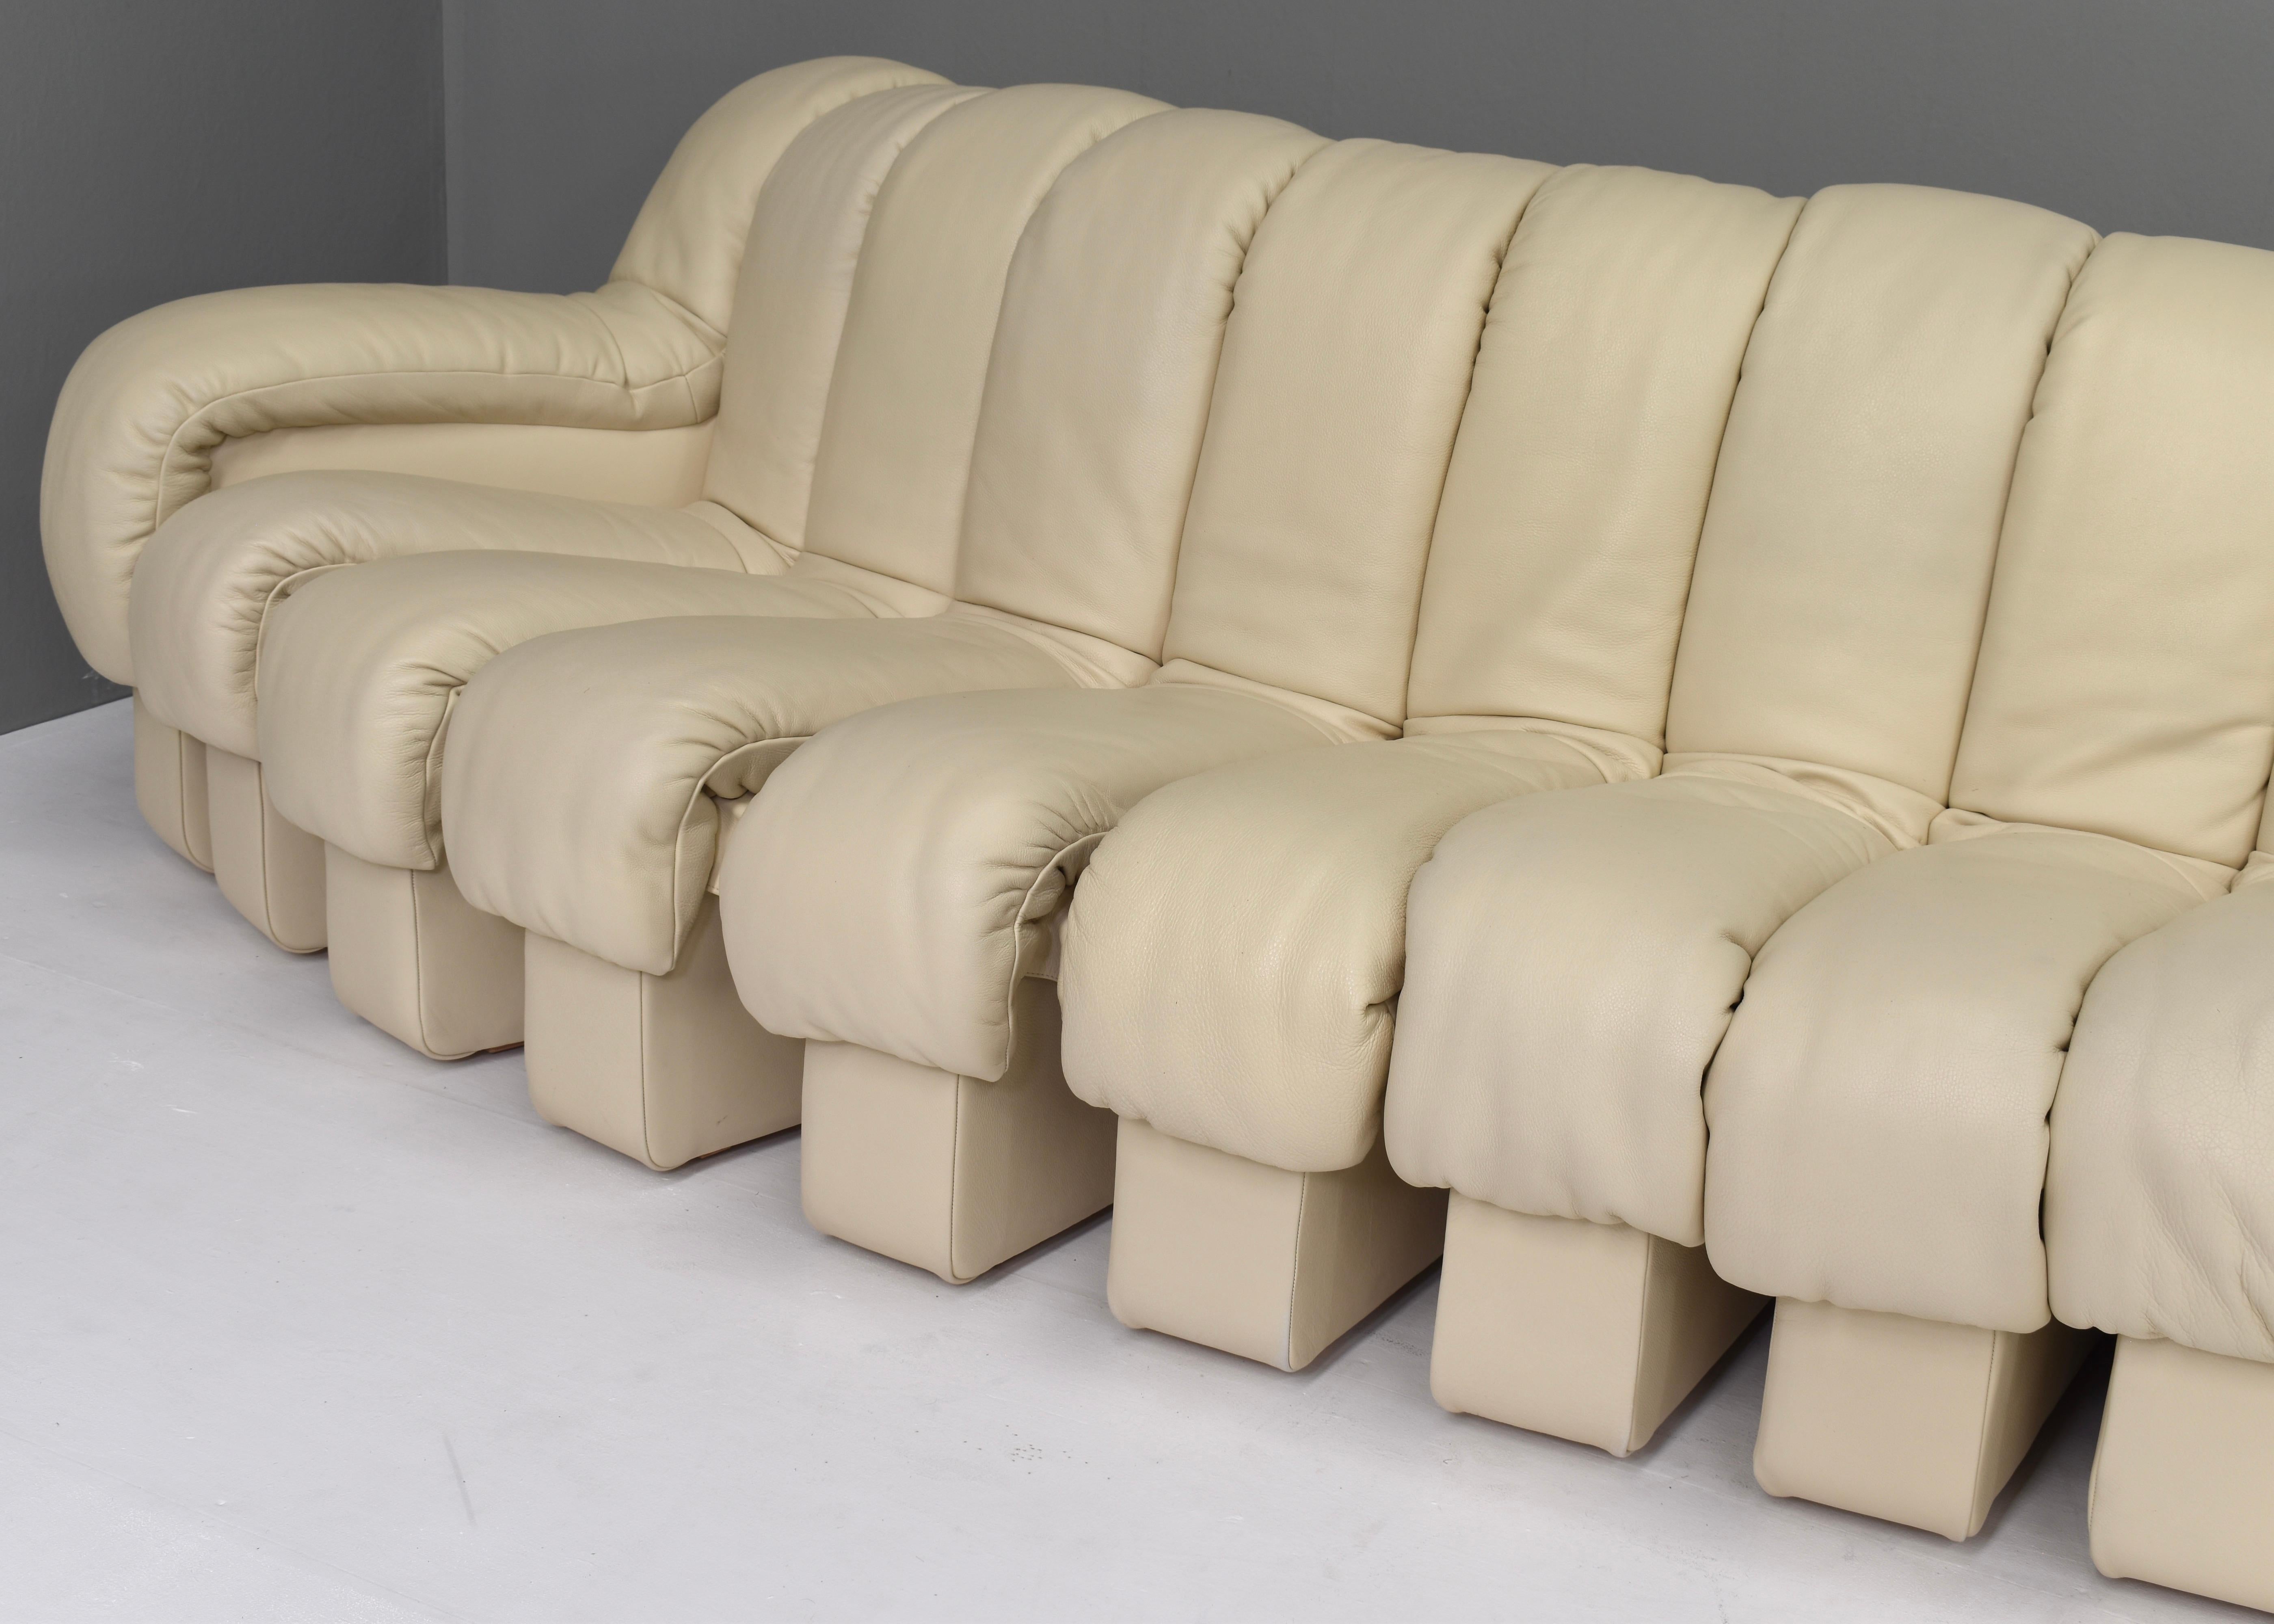 26 Pieces Ds600 Sectional Sofa and Chairs by De Sede in Crème Leather 10